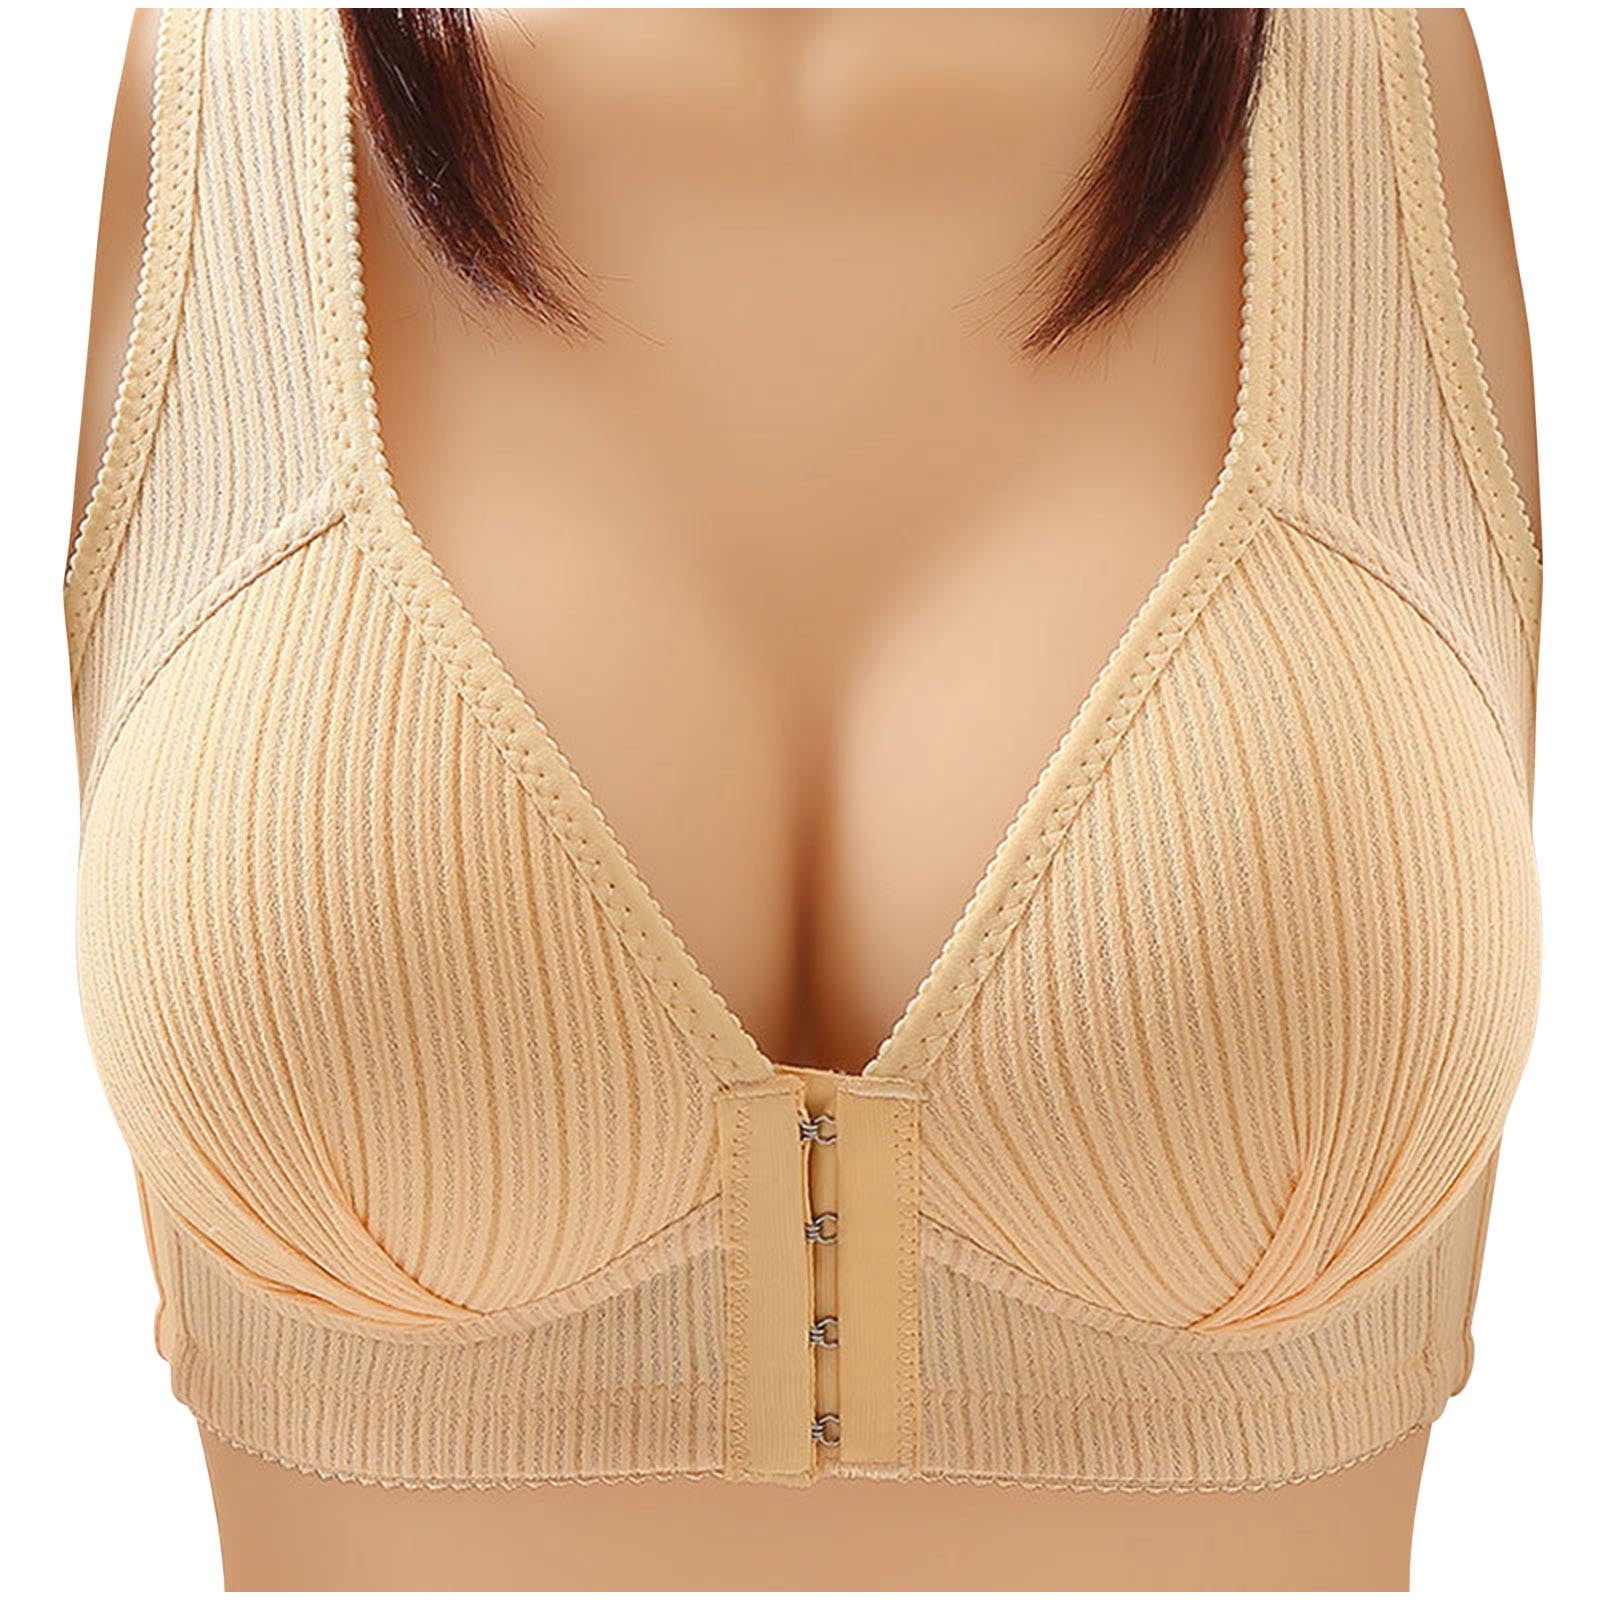 RYRJJ Seamless Lace Bras for Women 2 Pack Wirefree Comfortable Padded Lift Push  Up Thin Soft Sexy Back Smoothing Bra Pullover Bras Plus  Size(Beige/Beige,4XL) 